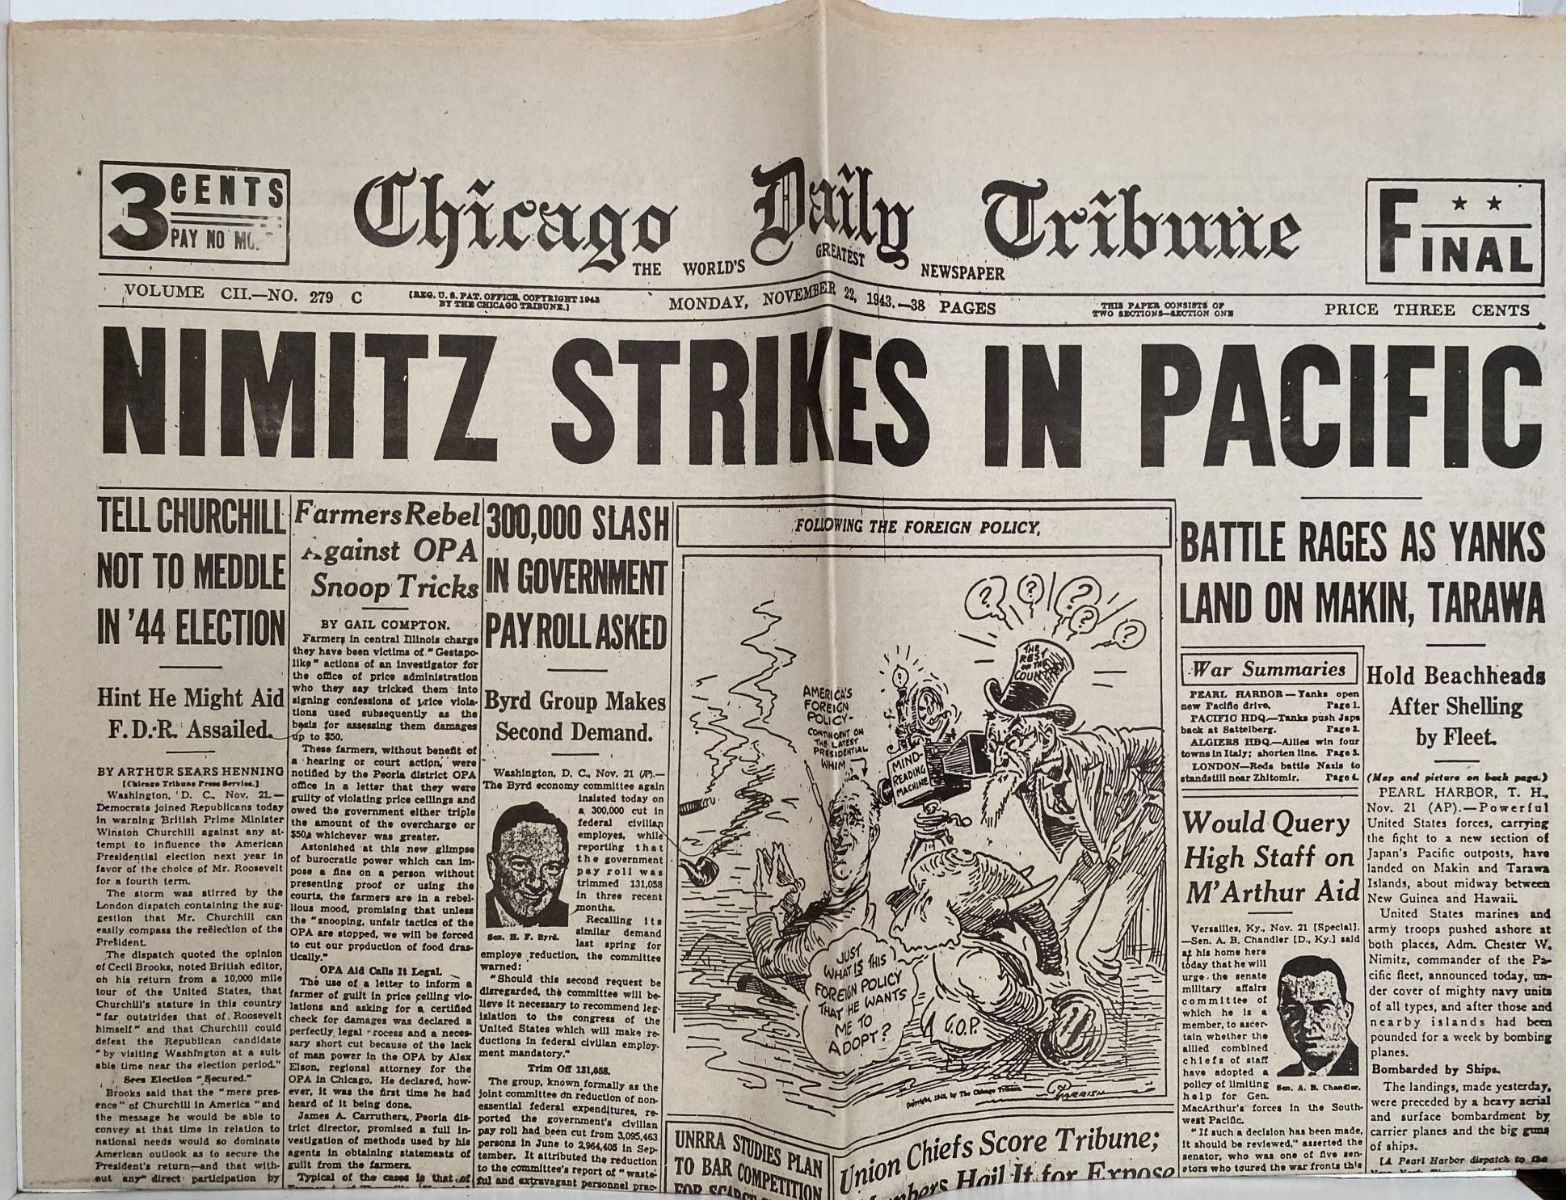 OLD WARTIME NEWSPAPER: Chicago Daily Tribune, Monday 22nd November 1943